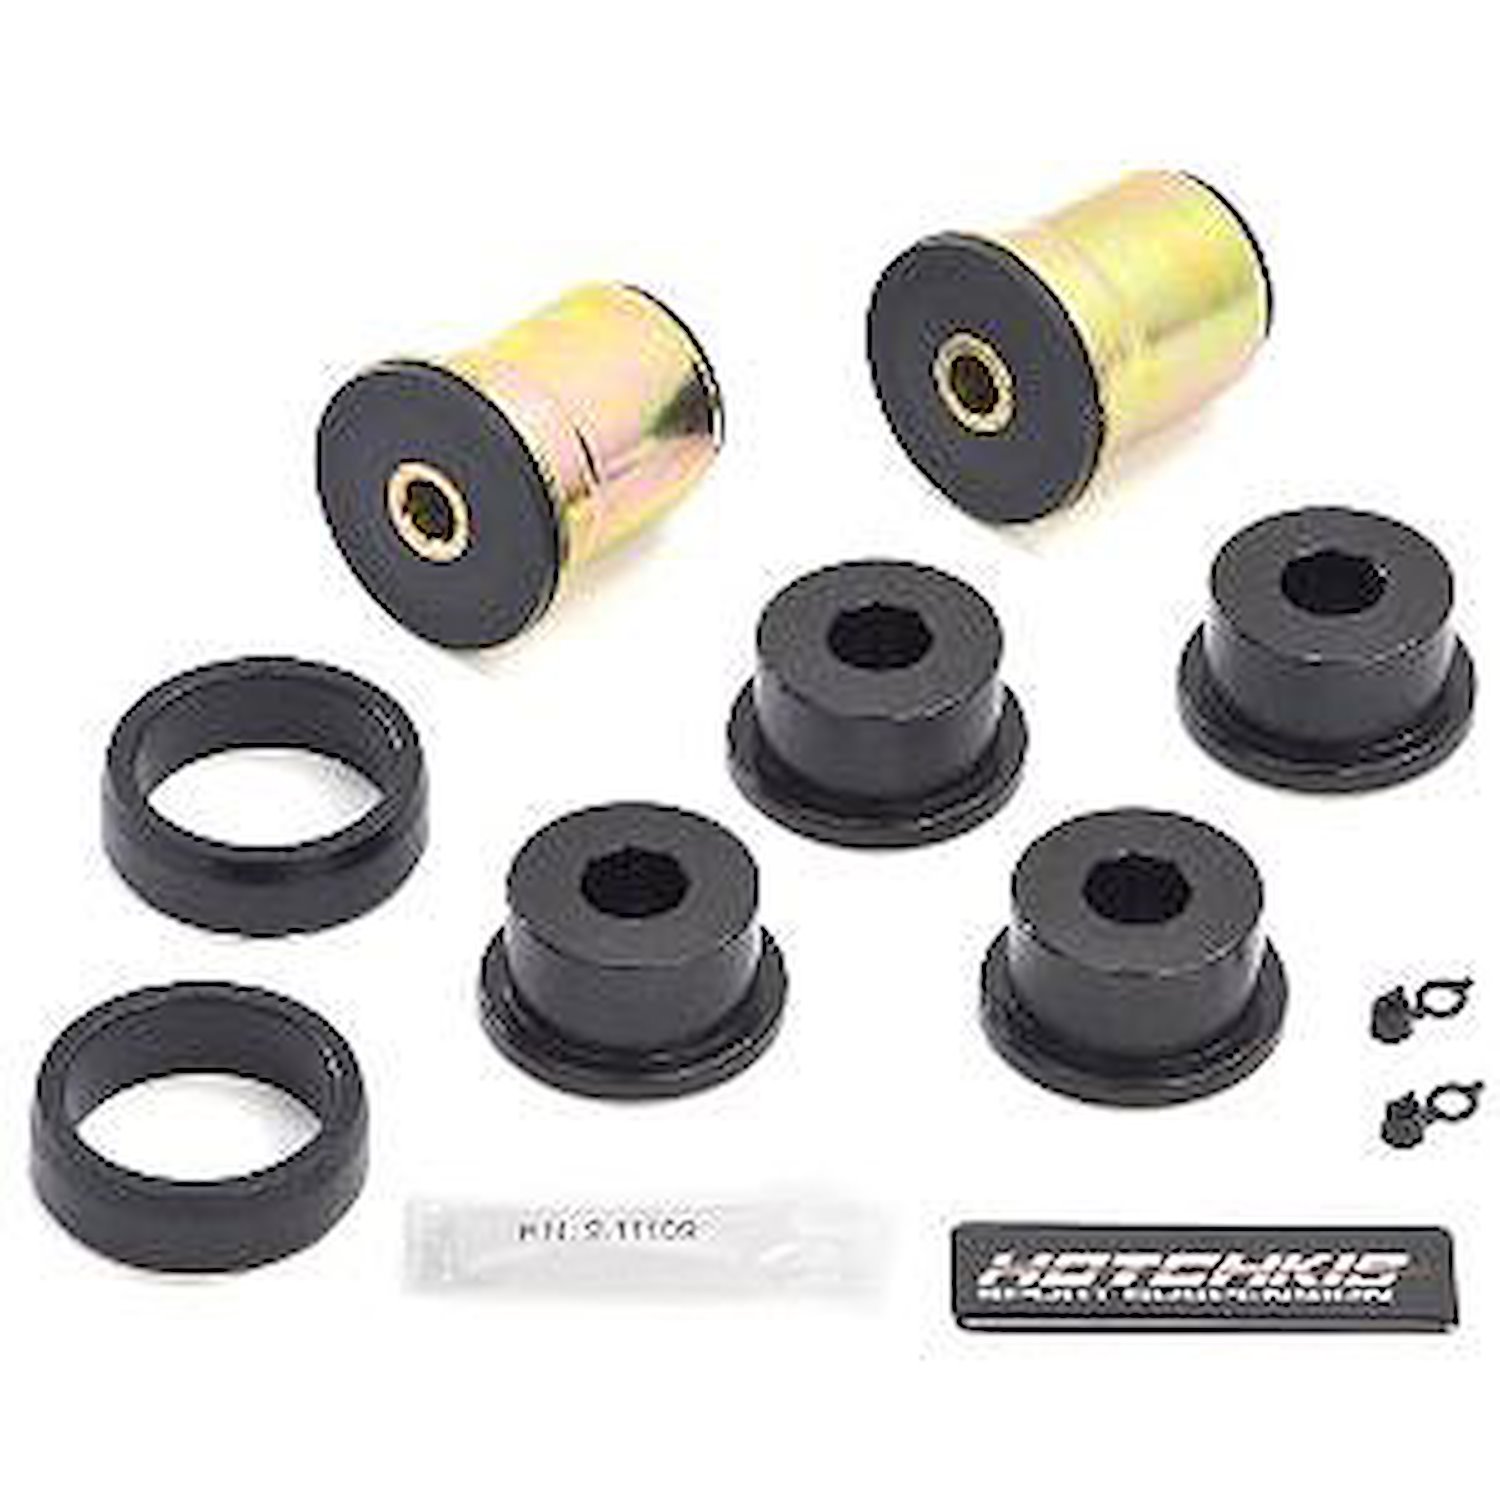 Trailing Arm Bushing Kit For Use With 515-1302, 1302R